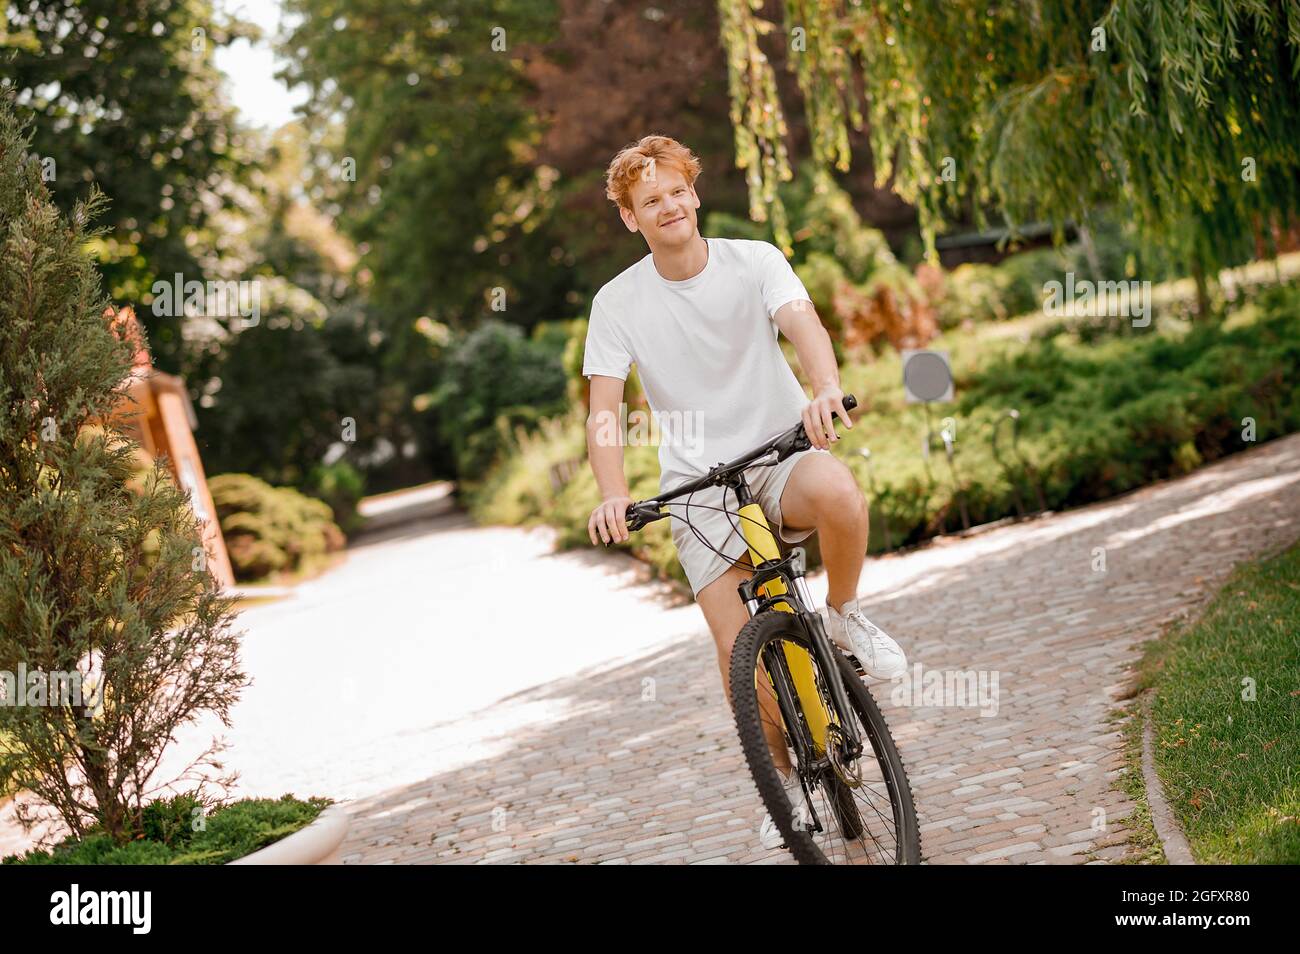 Contented young bike rider cycling alone outdoors Stock Photo